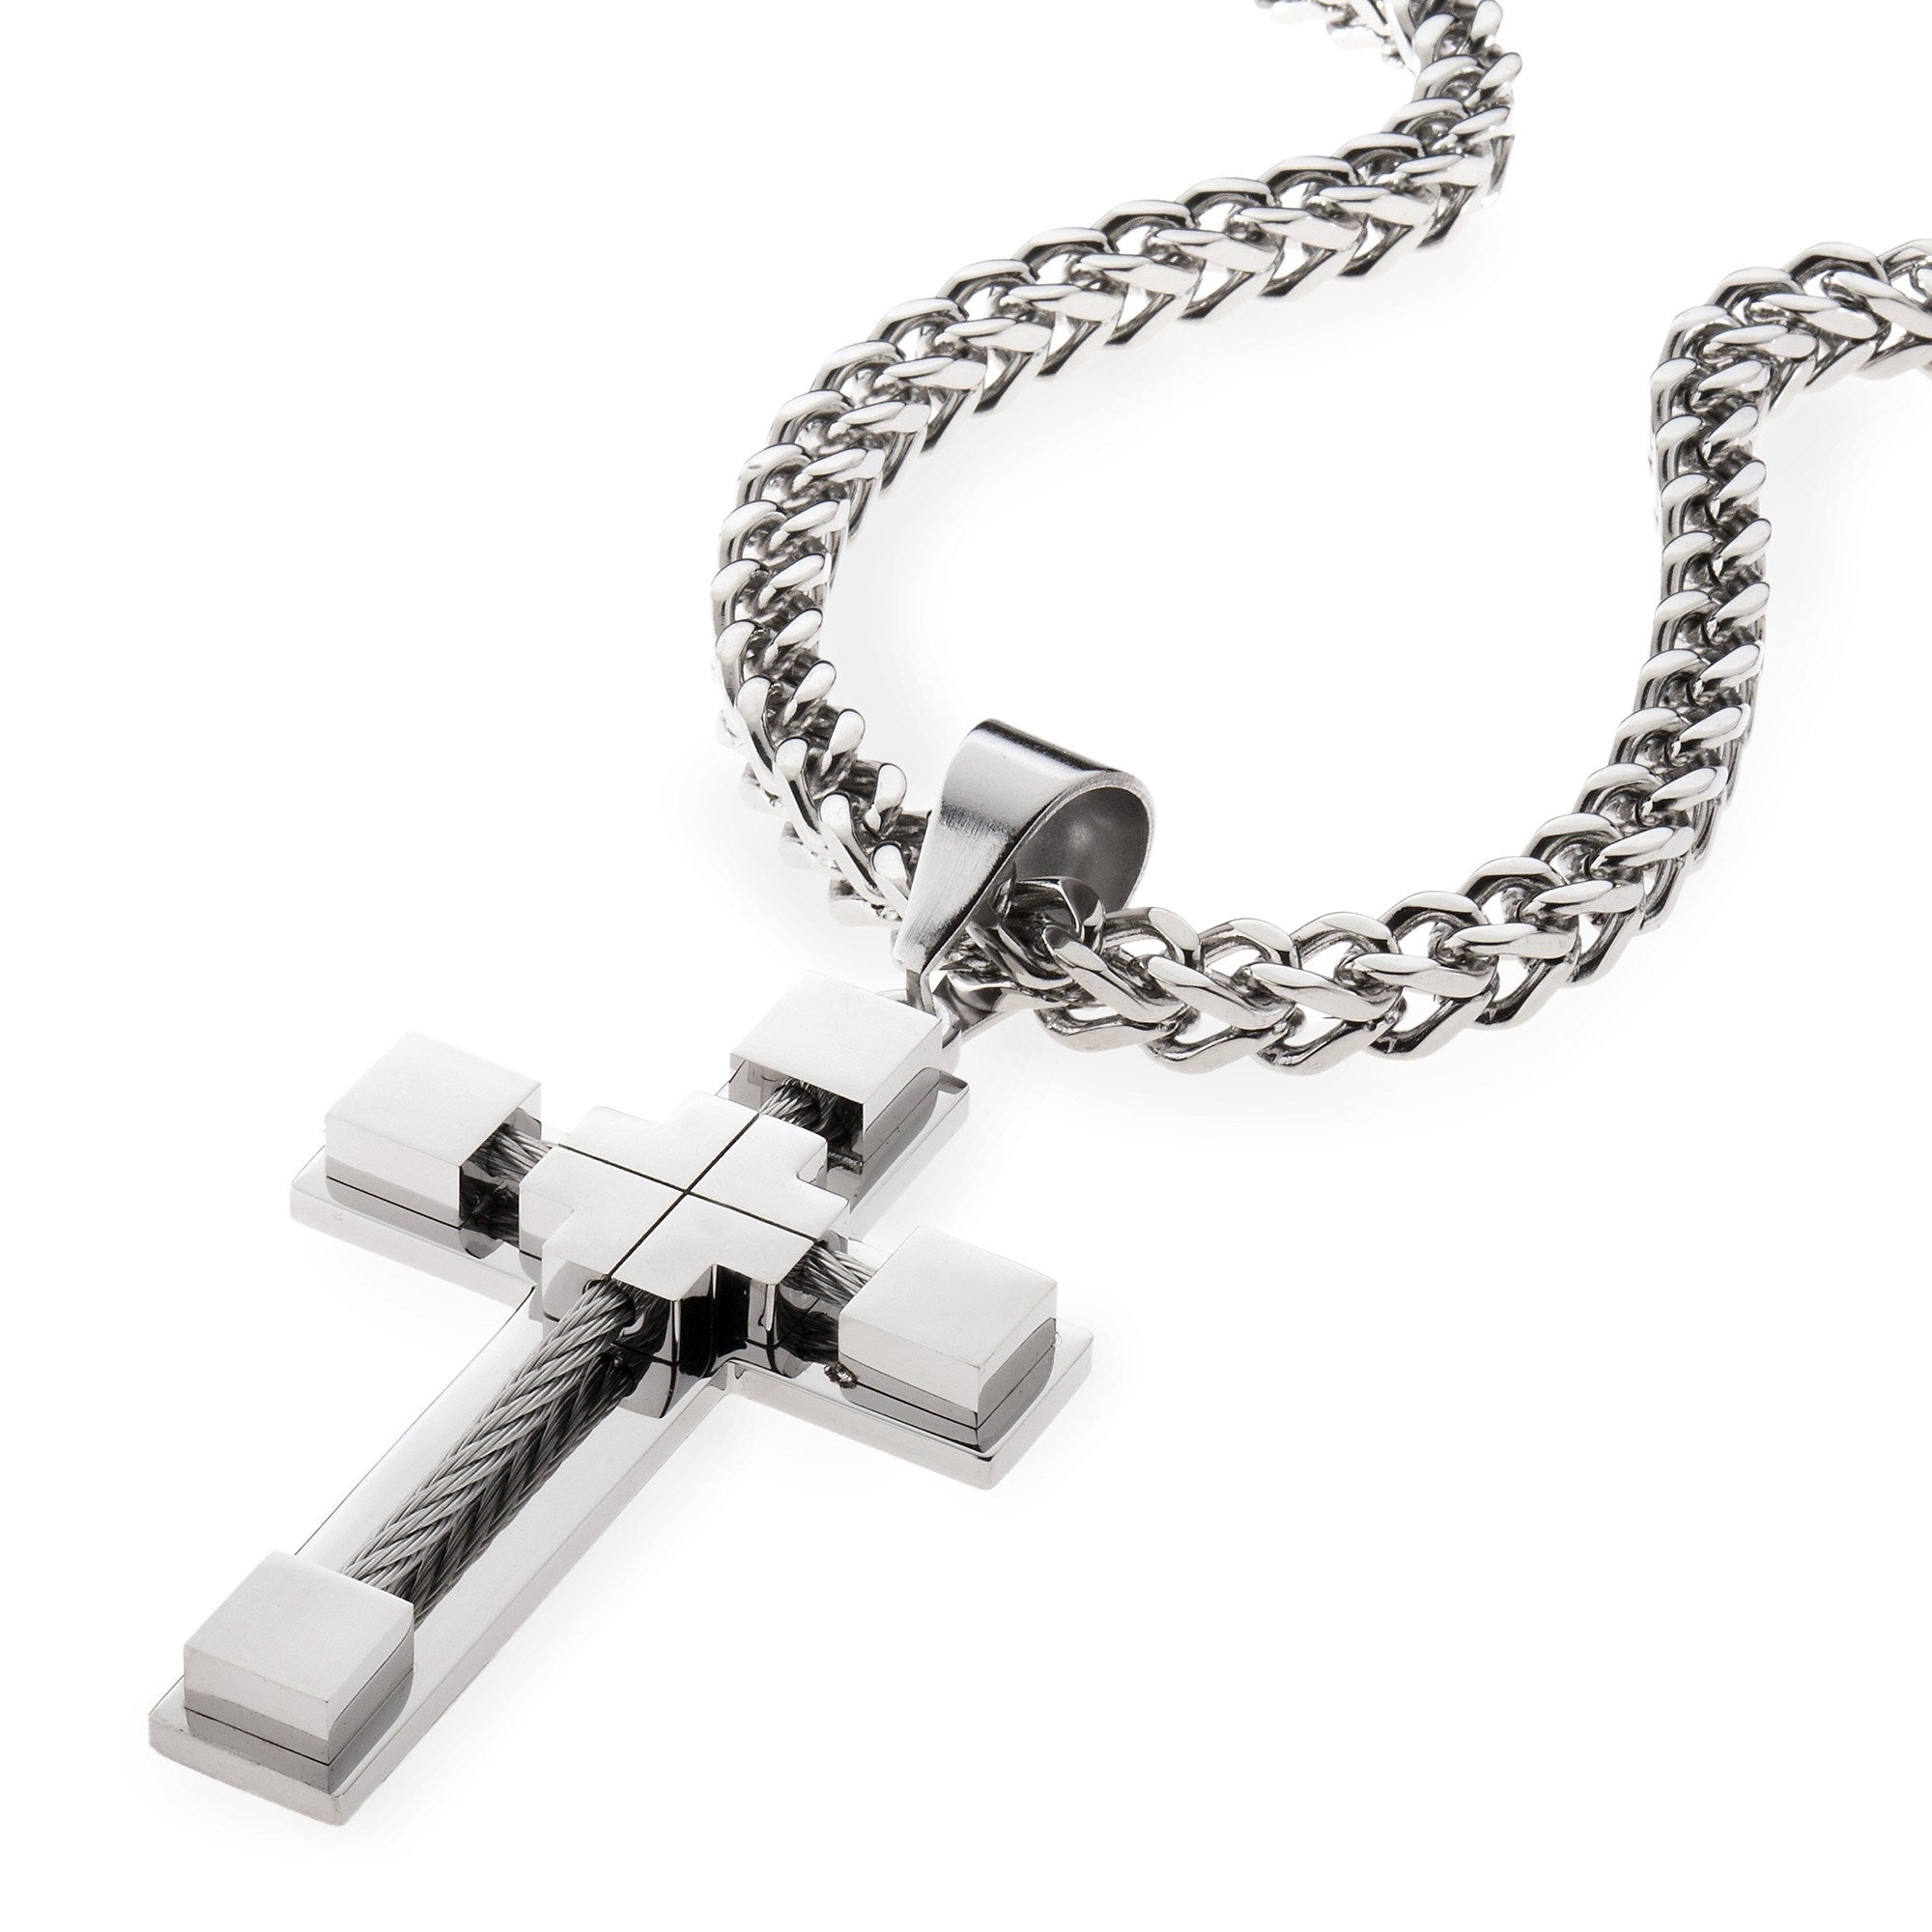 Buy Ursteel Cross Necklace for Men, Silver Black Gold Stainless Steel Cross  Pendant Necklace for Men, 16-30 Inches Box Chain, Metal at Amazon.in